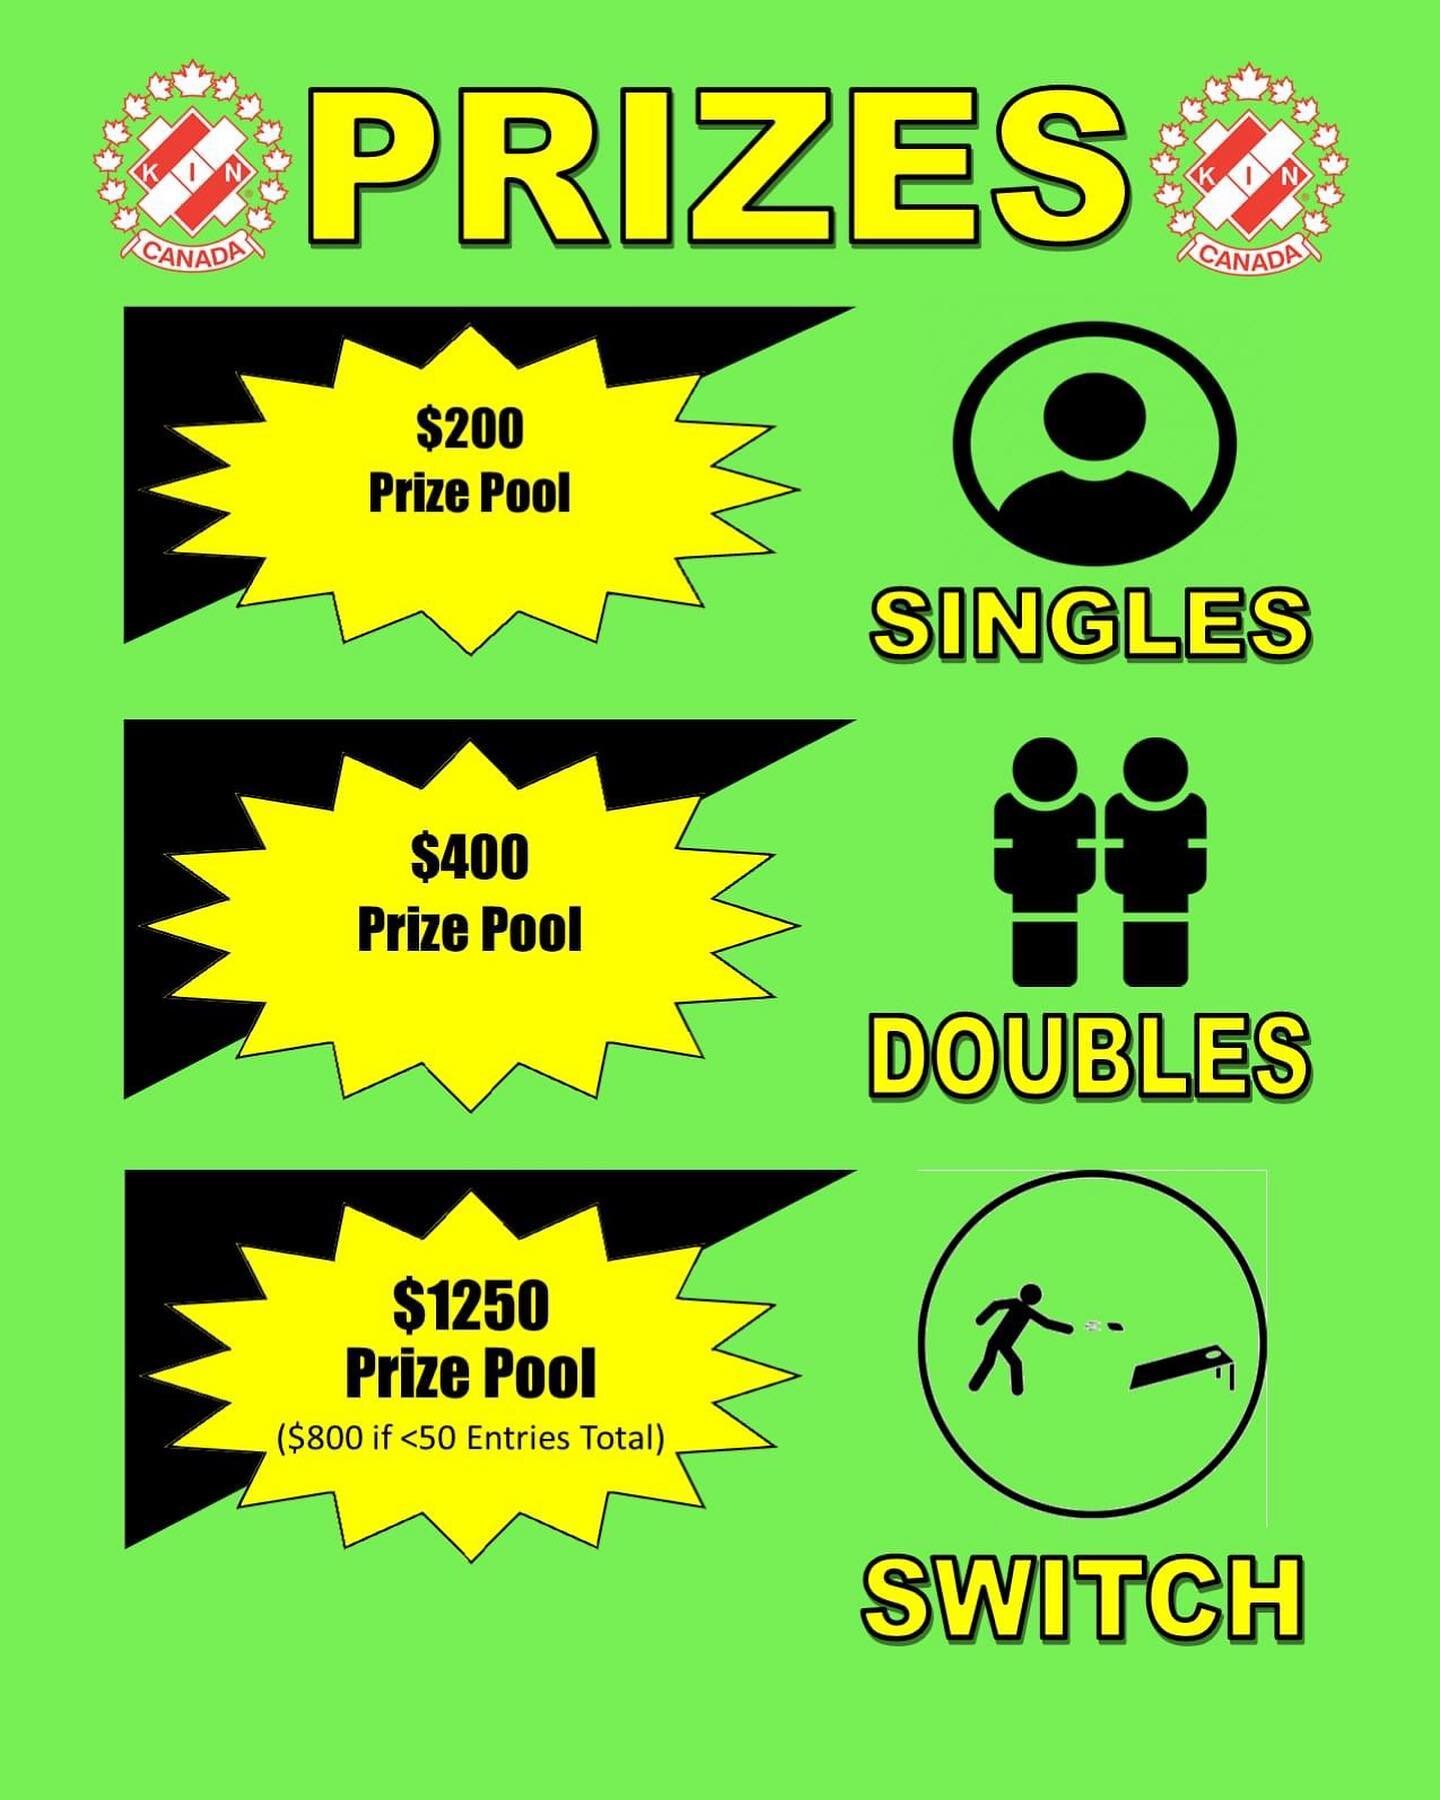 Check out these awesome prizes for the Kelowna Kinsmen Cornhole tournament THIS SATURDAY! Make sure to bring your friends and competitive spirit 🏆